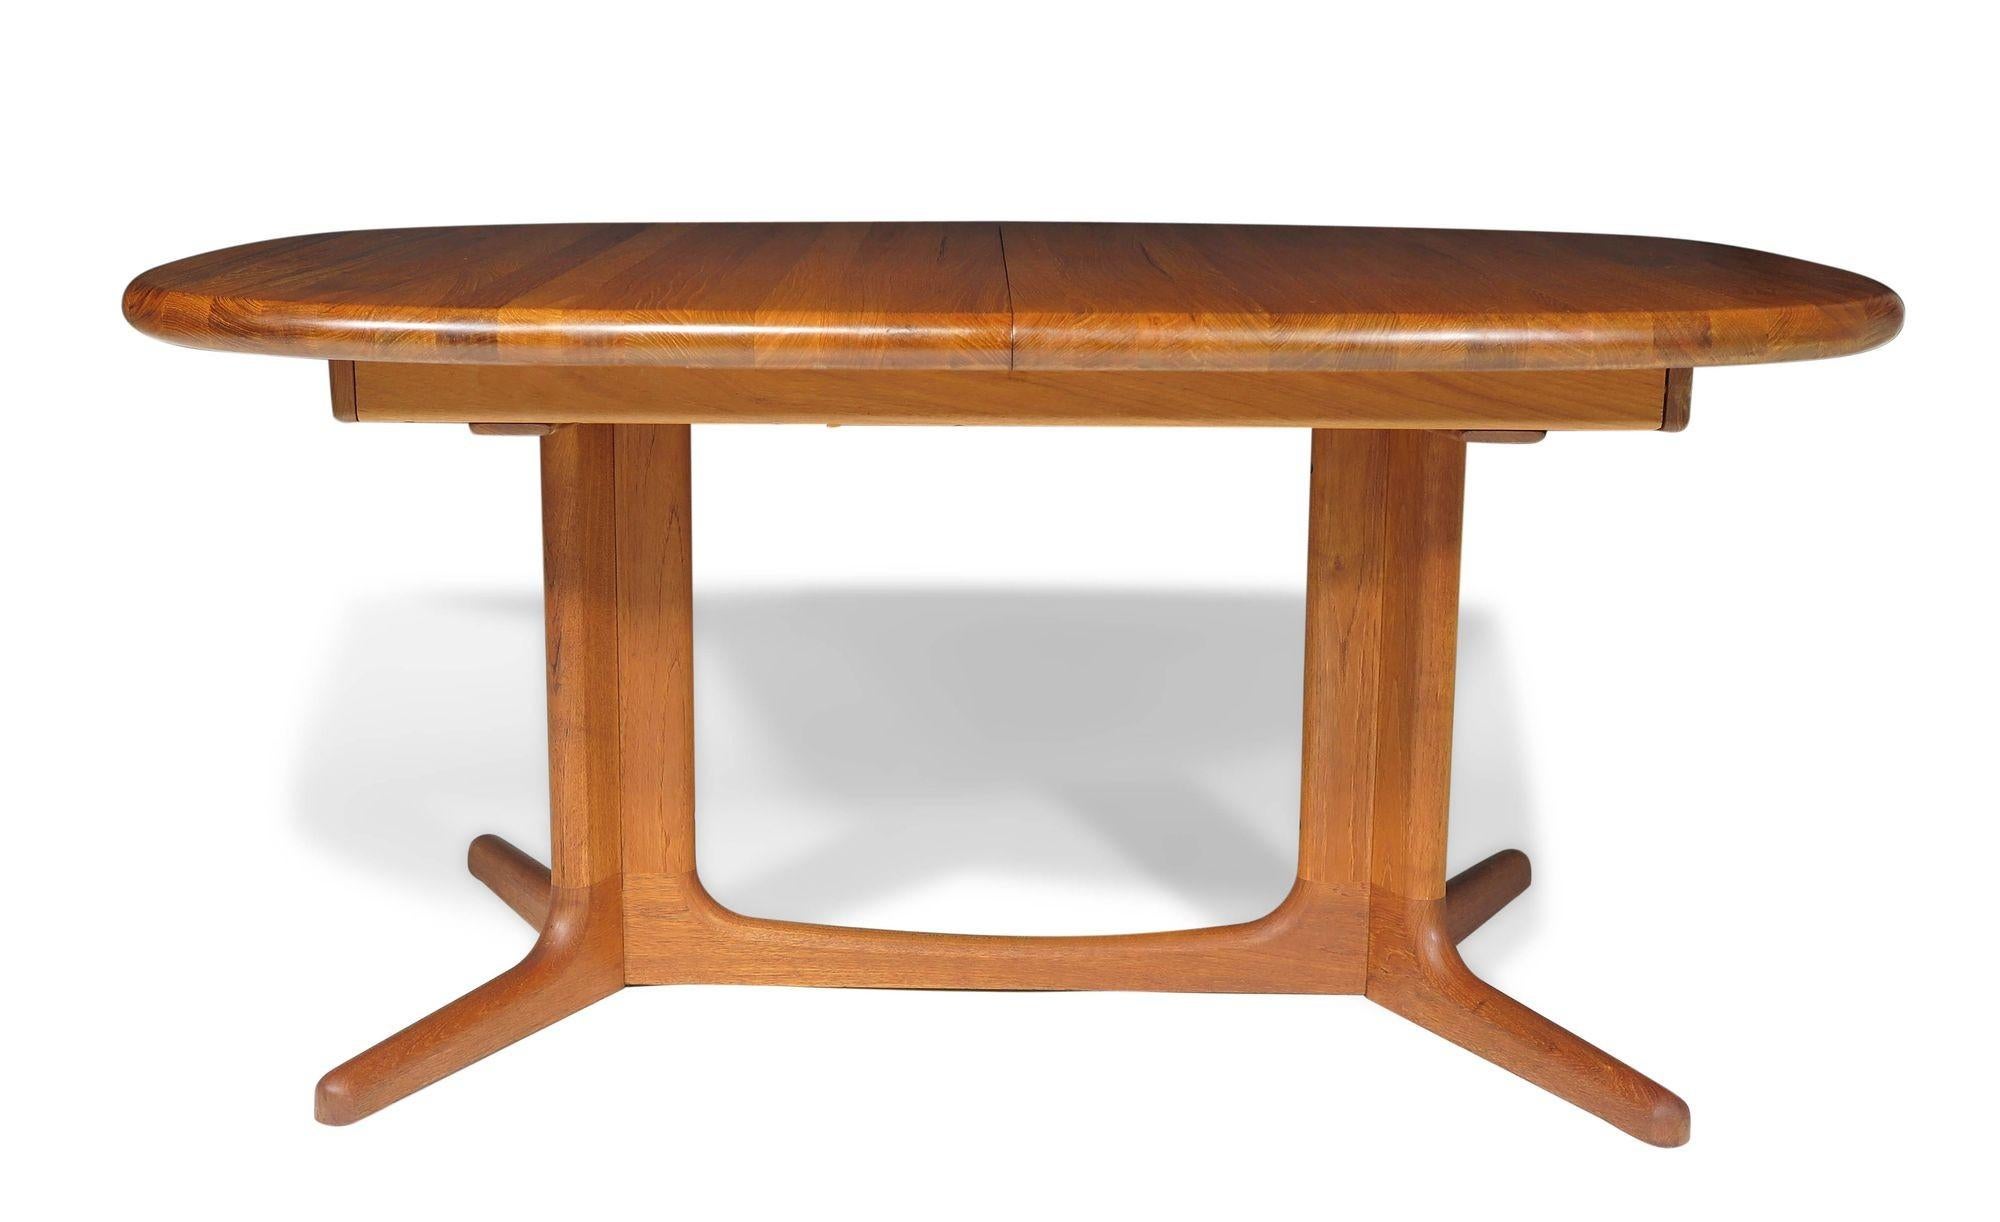 Midcentury oval solid teak dining table crafted of planks of old-growth teak, with two leaves, raised on a pedestal base. Finely restored by our team of in-house craftspeople. Excellent condition with minor signs of age and use.

Measurements W